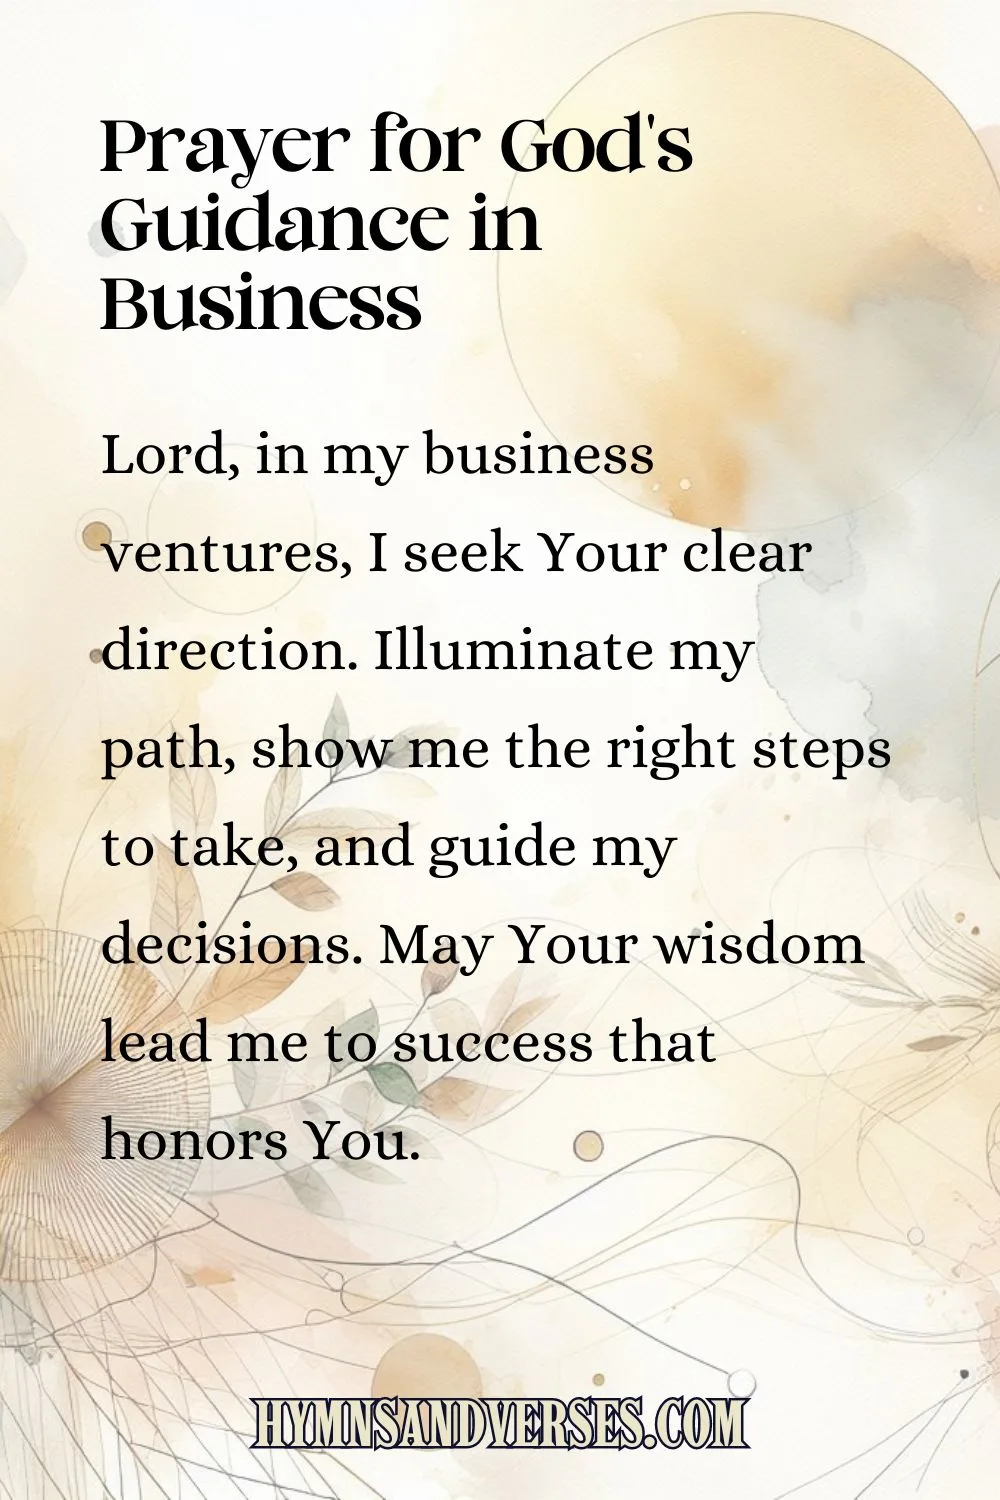 Pin sized image for Prayers for God's Guidance in Business, reads: Lord, in my business ventures, I seek Your clear direction. Illuminate my path, show me the right steps to take, and guide my decisions. May Your wisdom lead me to success that honors You.